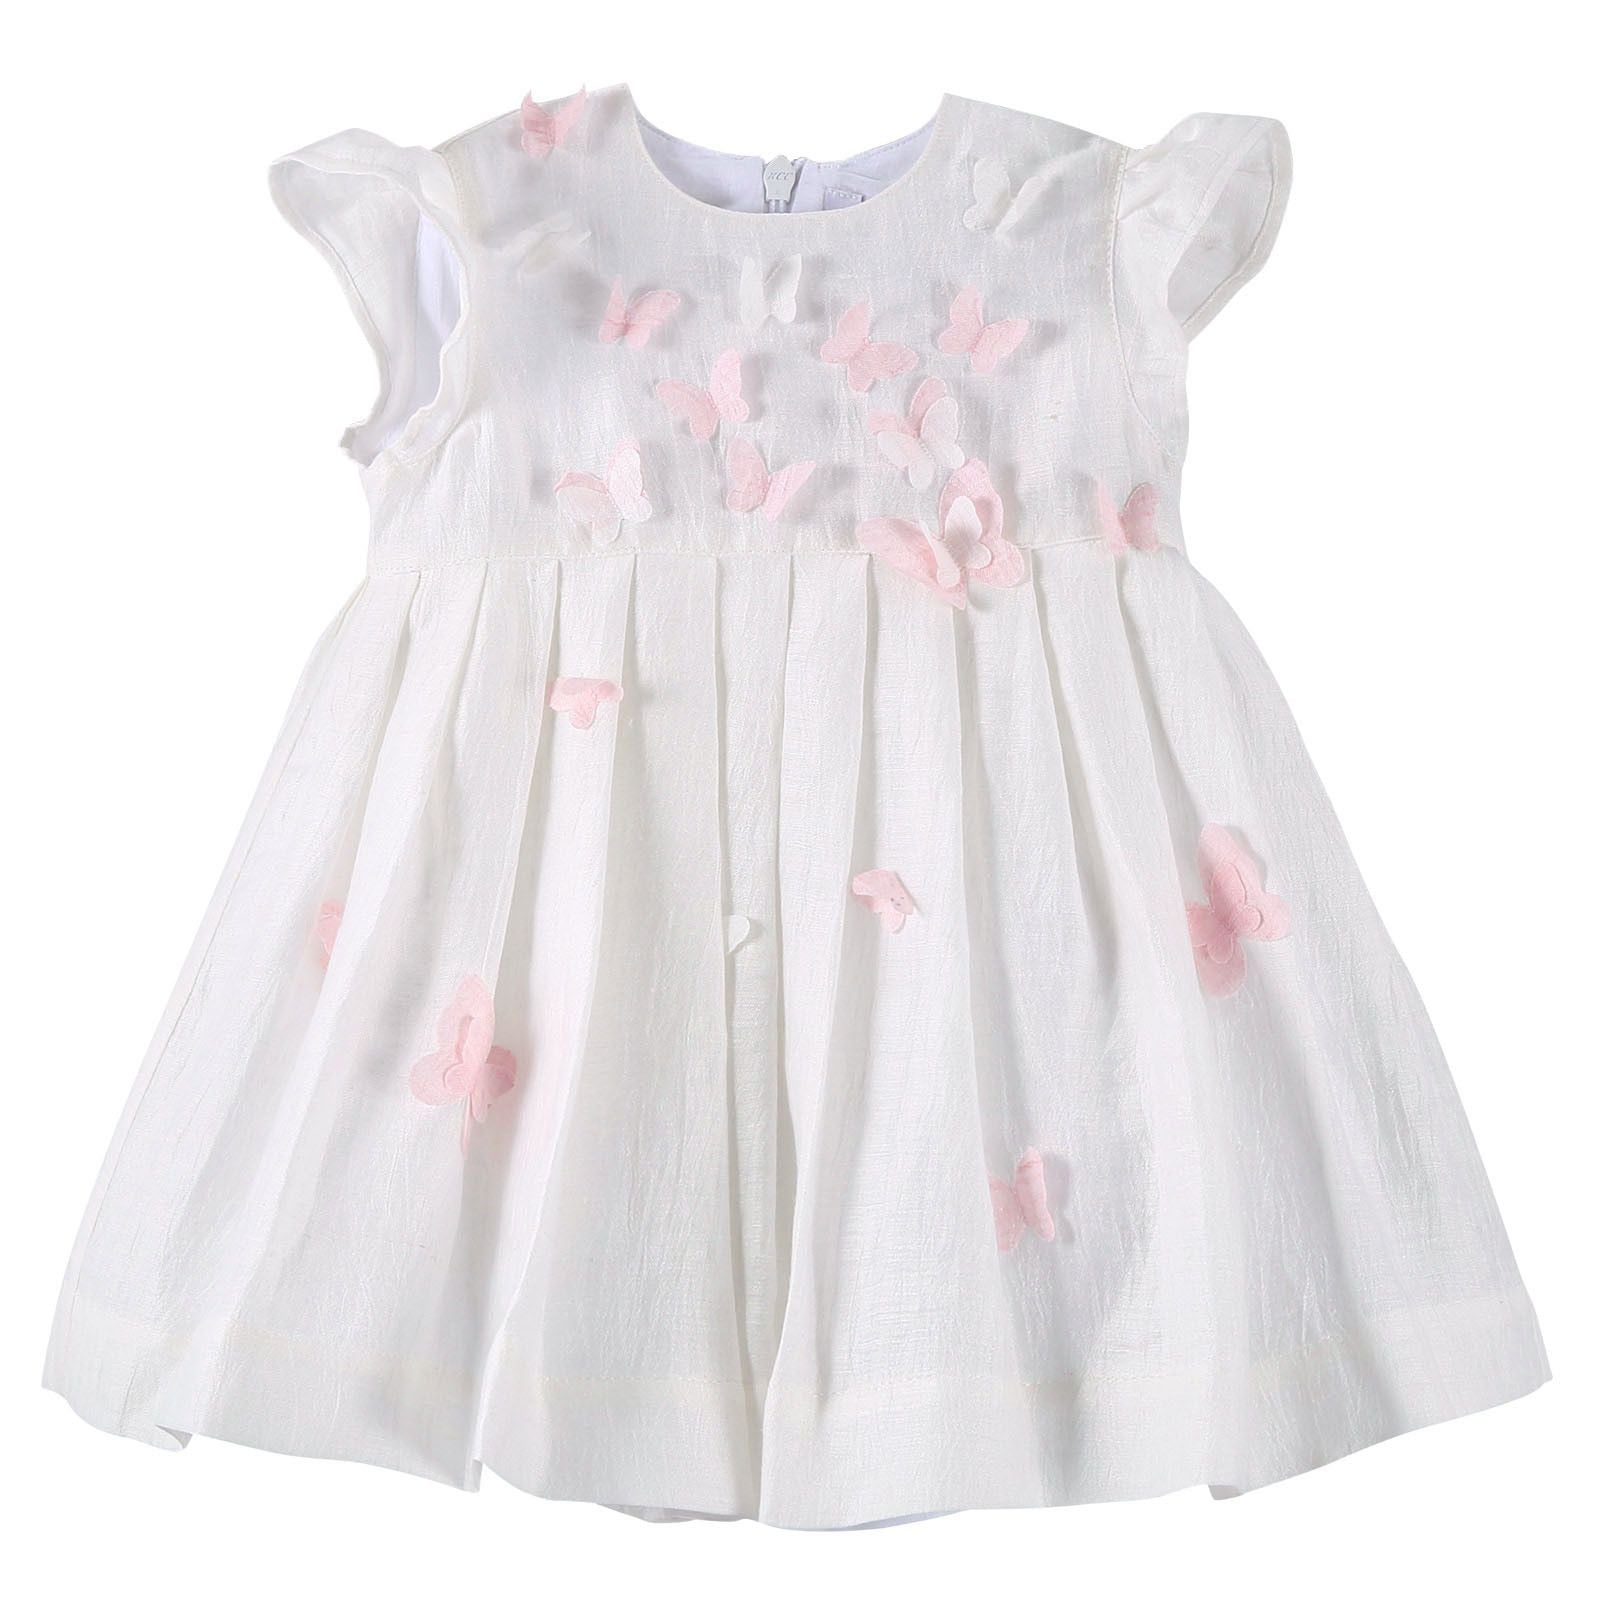 Baby Girls Ivory Dress With Pink Butterfly Patch Trims - CÉMAROSE | Children's Fashion Store - 1